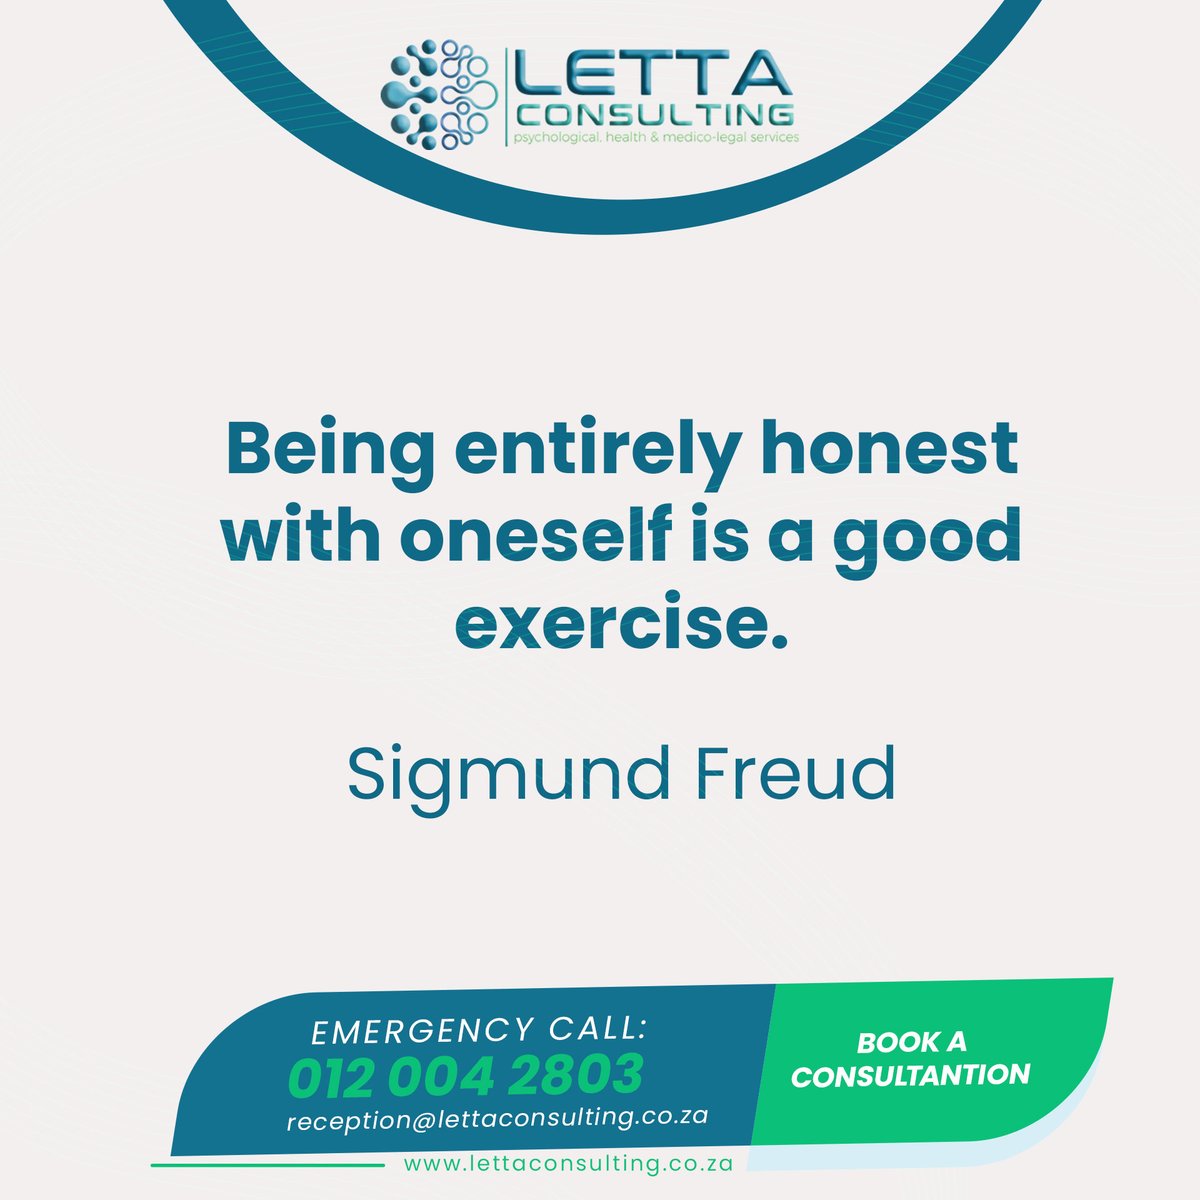 Do you Agree? Send your comments....

#genuineperson #relationships #therapy #psychologist #mentalhealth #healthyrelationships  #depression #lettaconsulting

Let us help!
buff.ly/48bnwBA
Call us at: 012 004 2803
Whatsapp: 0657213258
Email: reception@lettaconsulting.co.za